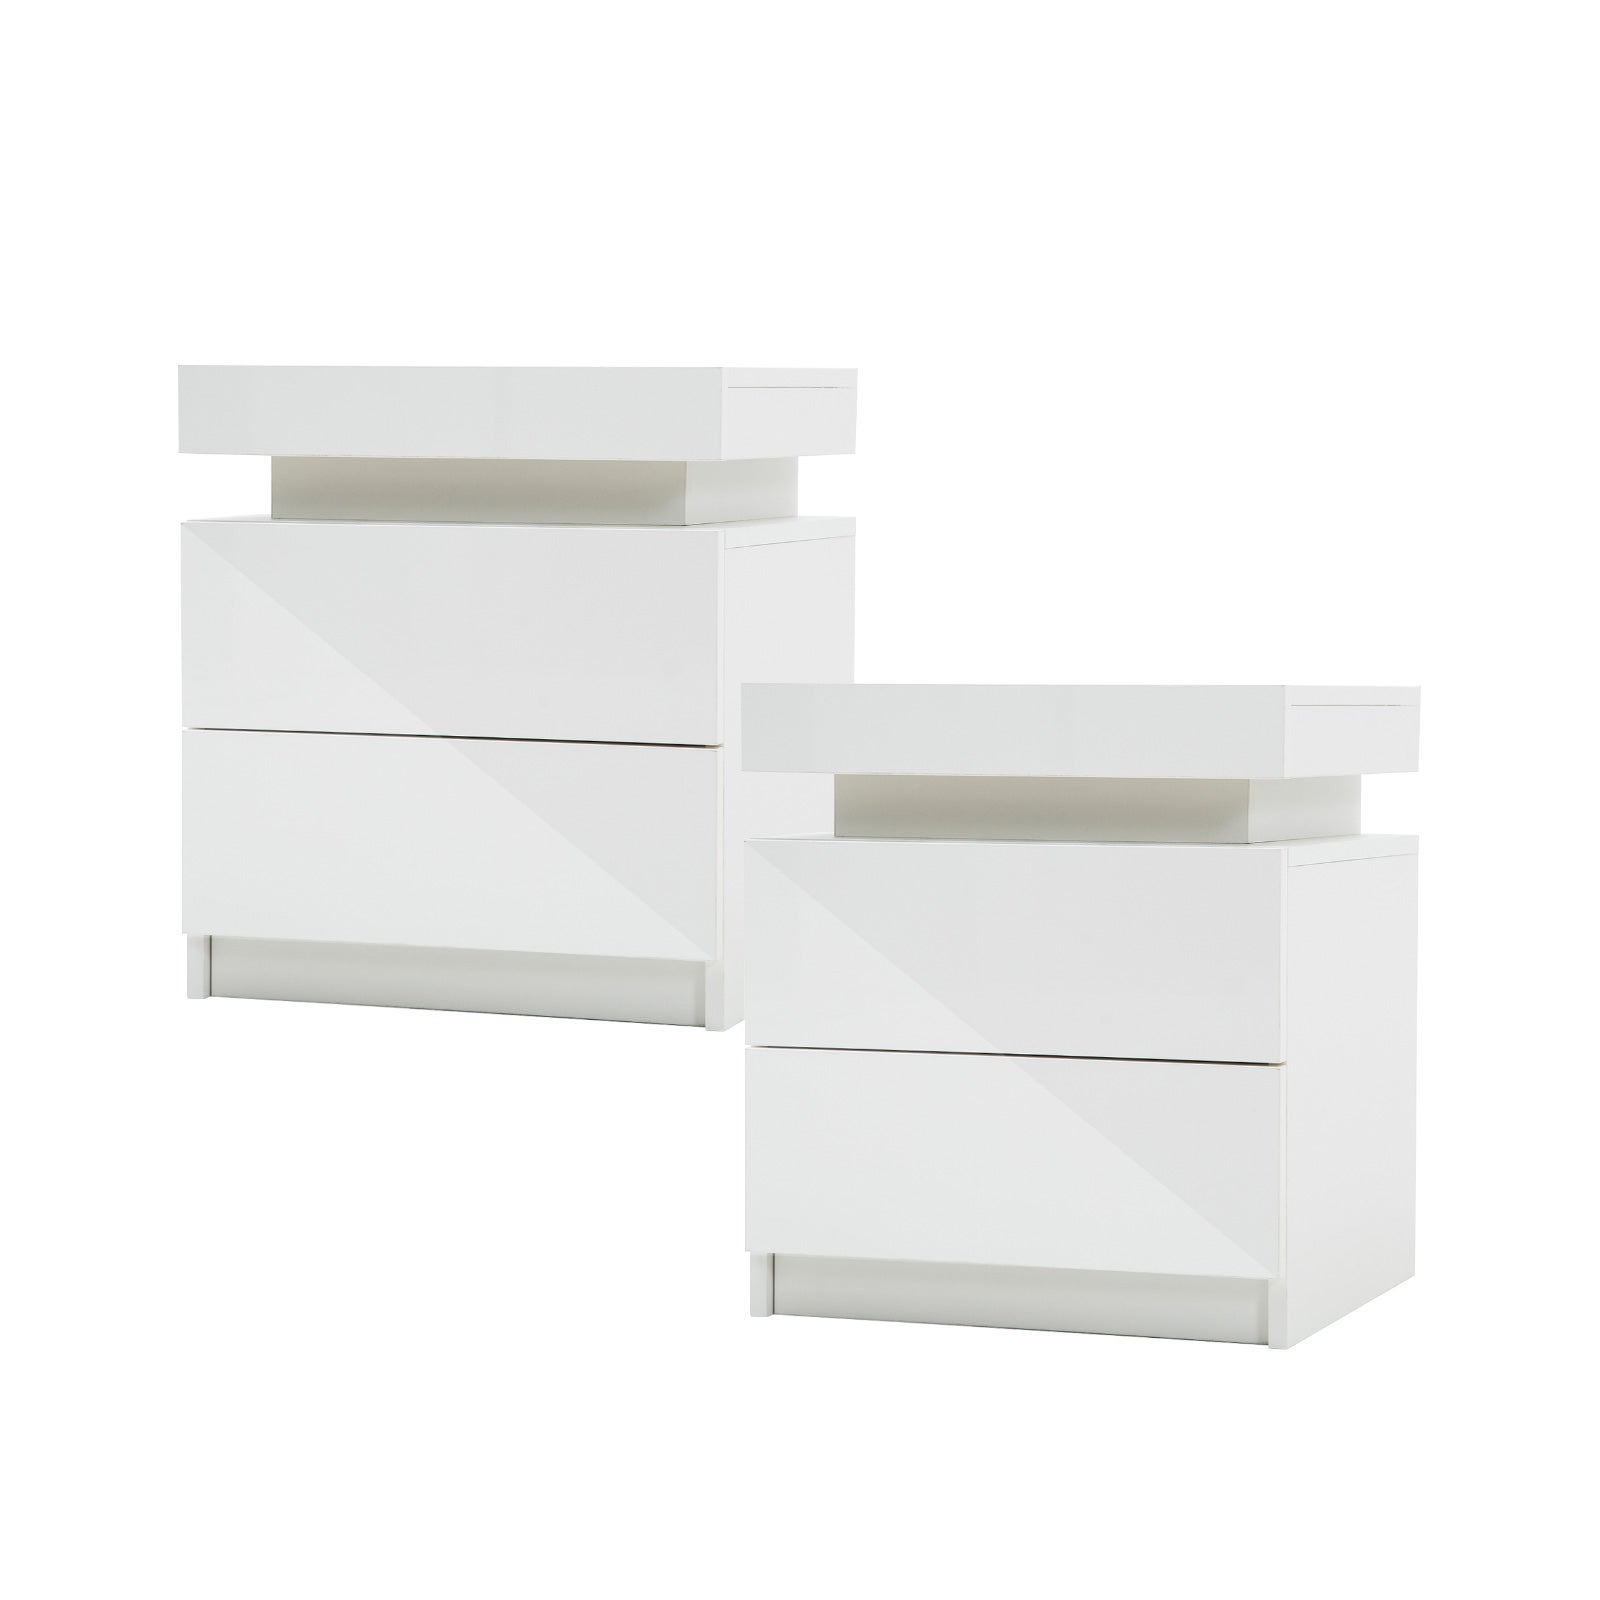 2x LED Bedside Table 2 Drawers Gloss White